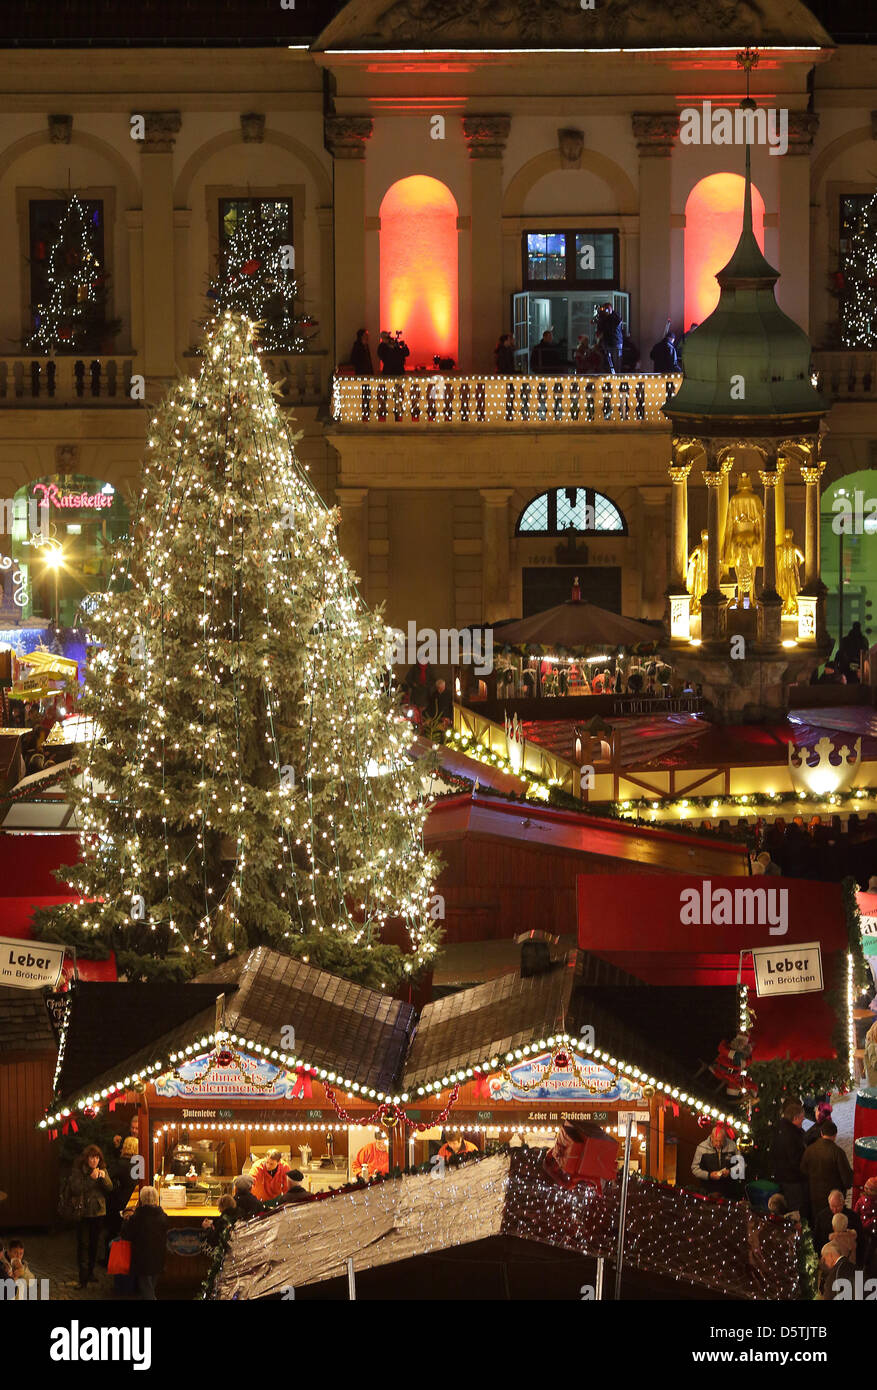 The christmas market with illuminated lights, booths and a tree is pictured at the city hall in Magdeburg, Germany, 26 November 2012. The market offers 135 booths which will be open until 20 December 2012. Photo: Jens Wolf Stock Photo